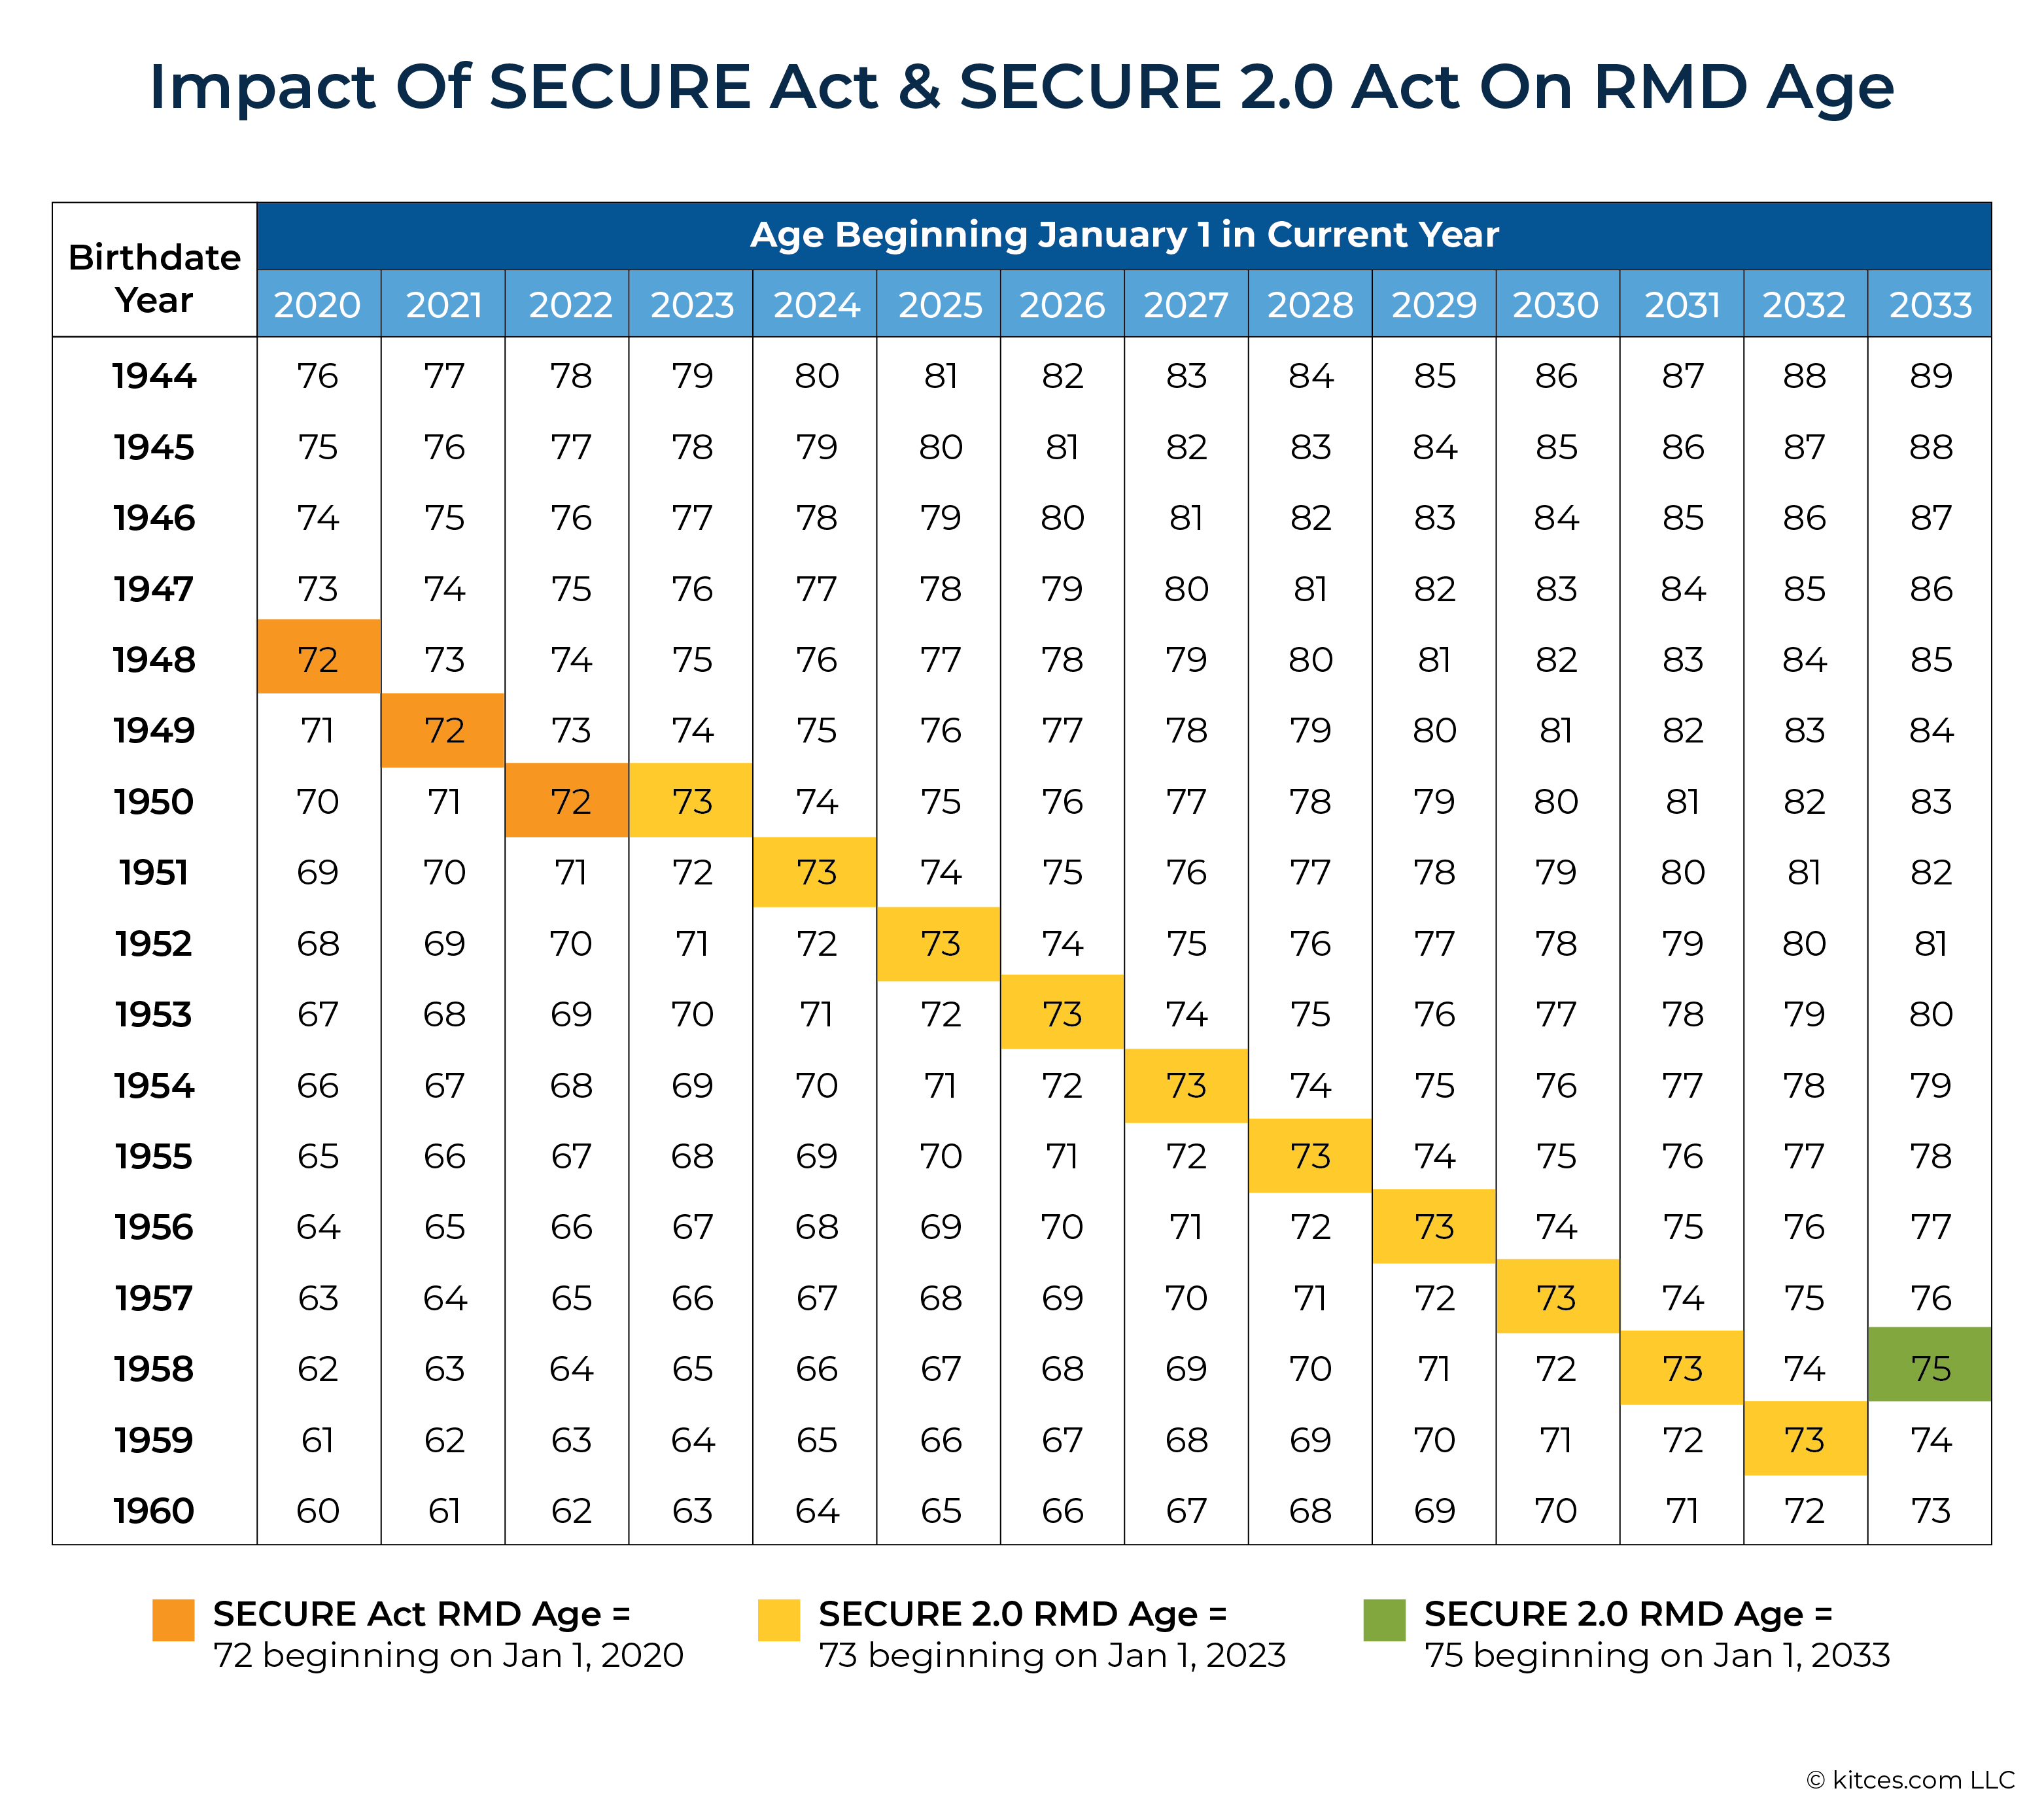 Impact Of SECURE Act And SECURE Act On RMD Age